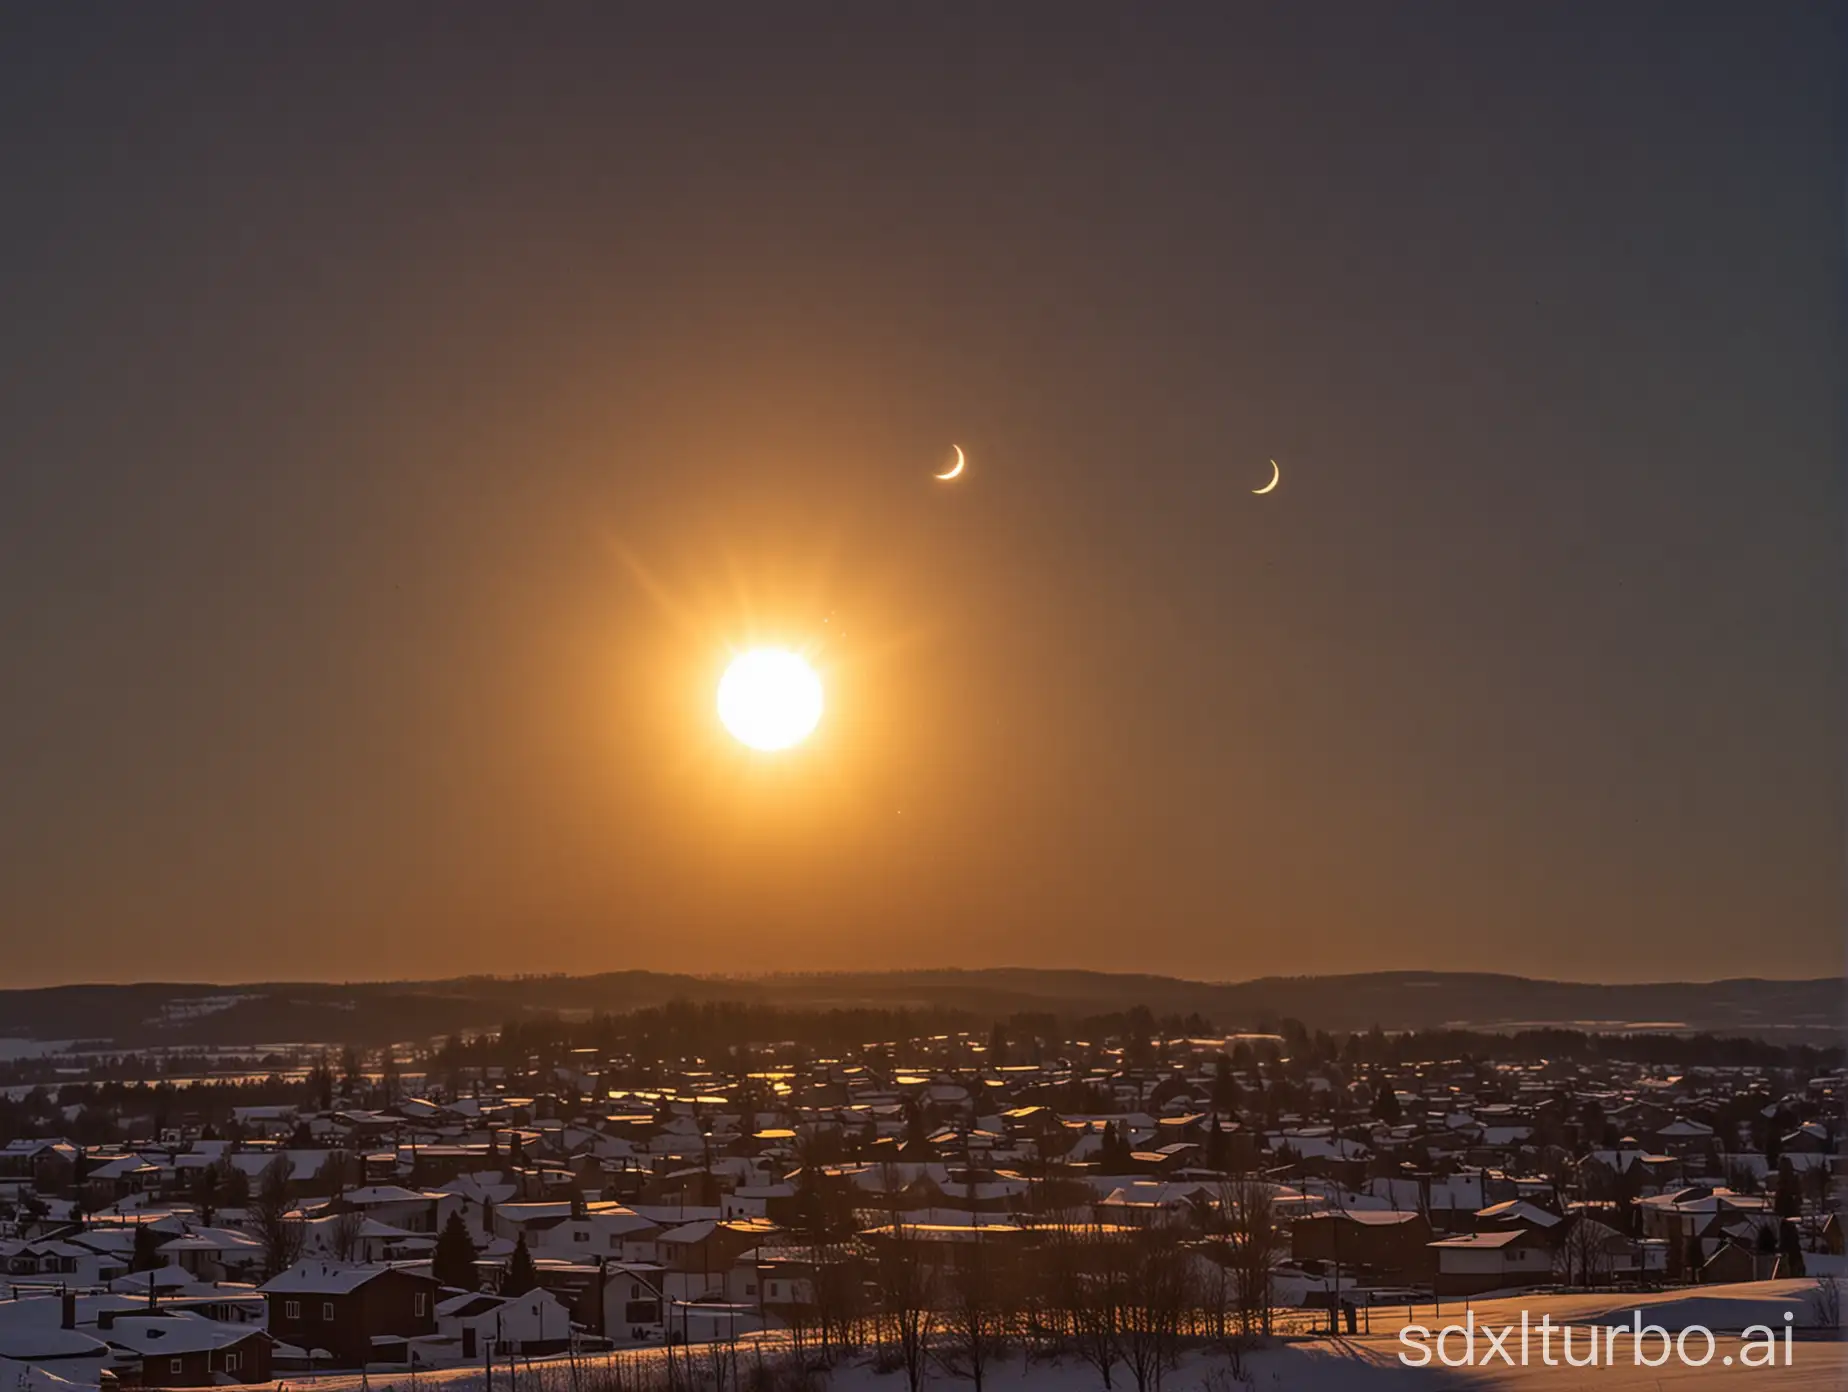 A solar eclipse within a small town showing the eclipsed sun.